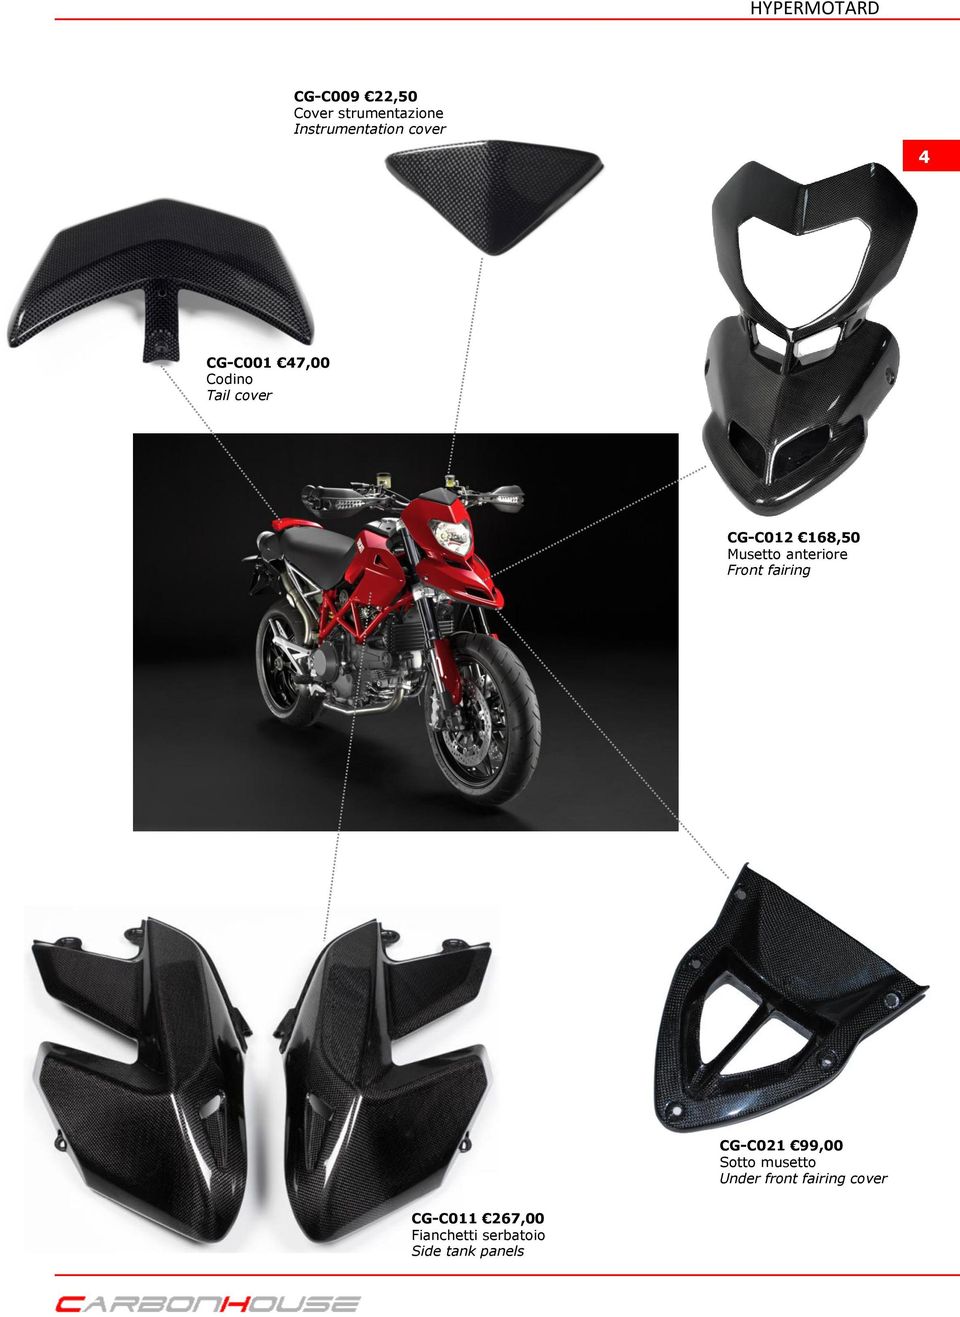 anteriore Front fairing CG-C021 99,00 Sotto musetto Under front